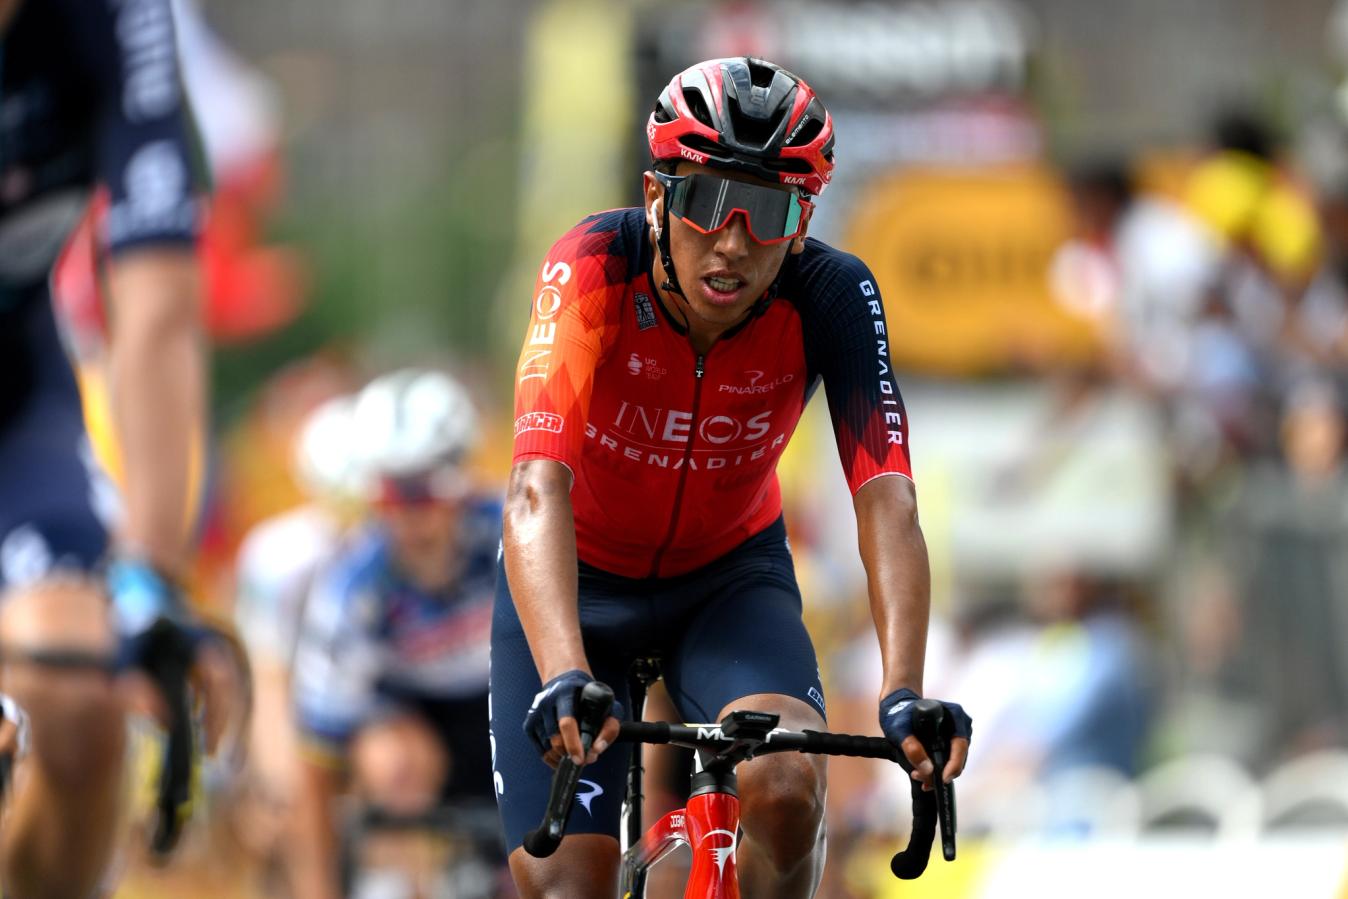 Bernal is keen to make his mark at the Tour de France.